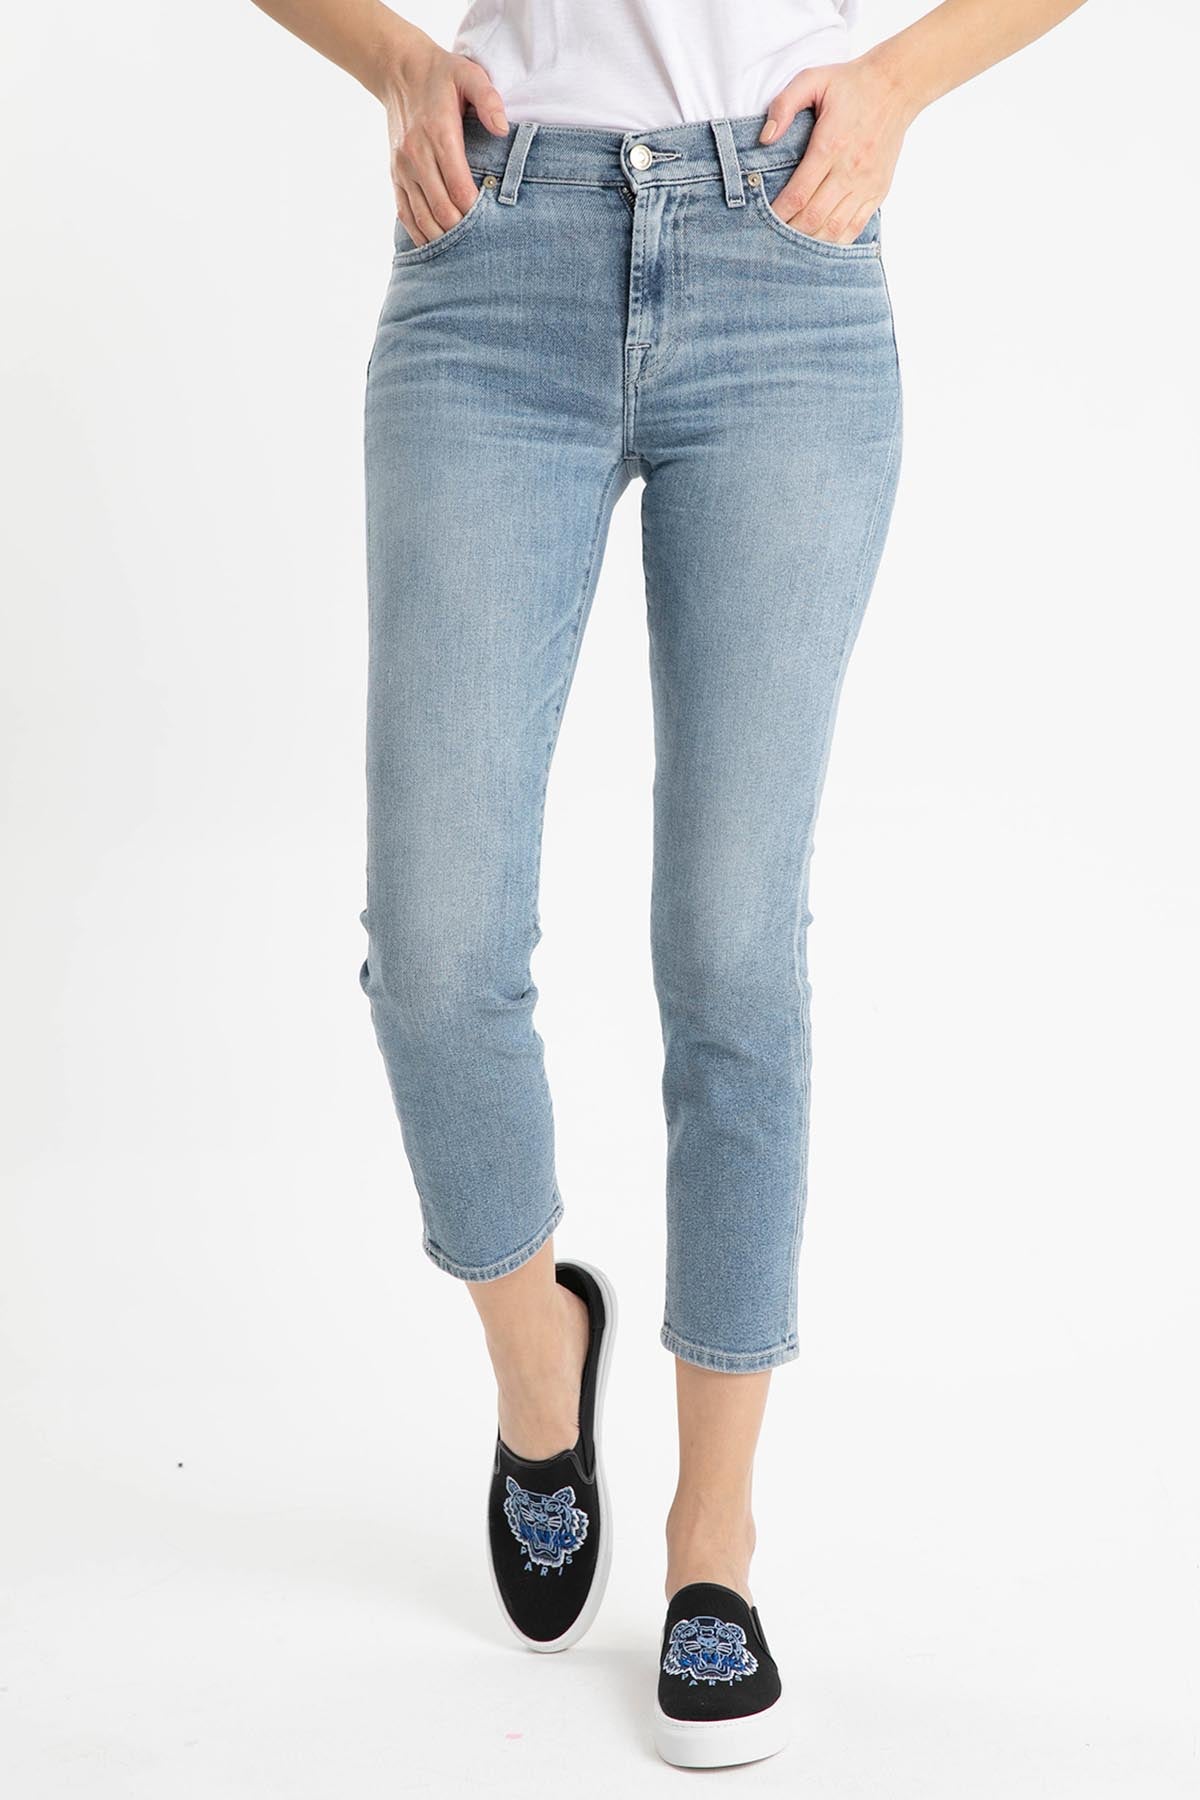 7 For All Mankind Luxe Vintage Stretch Jeans-Libas Trendy Fashion Store